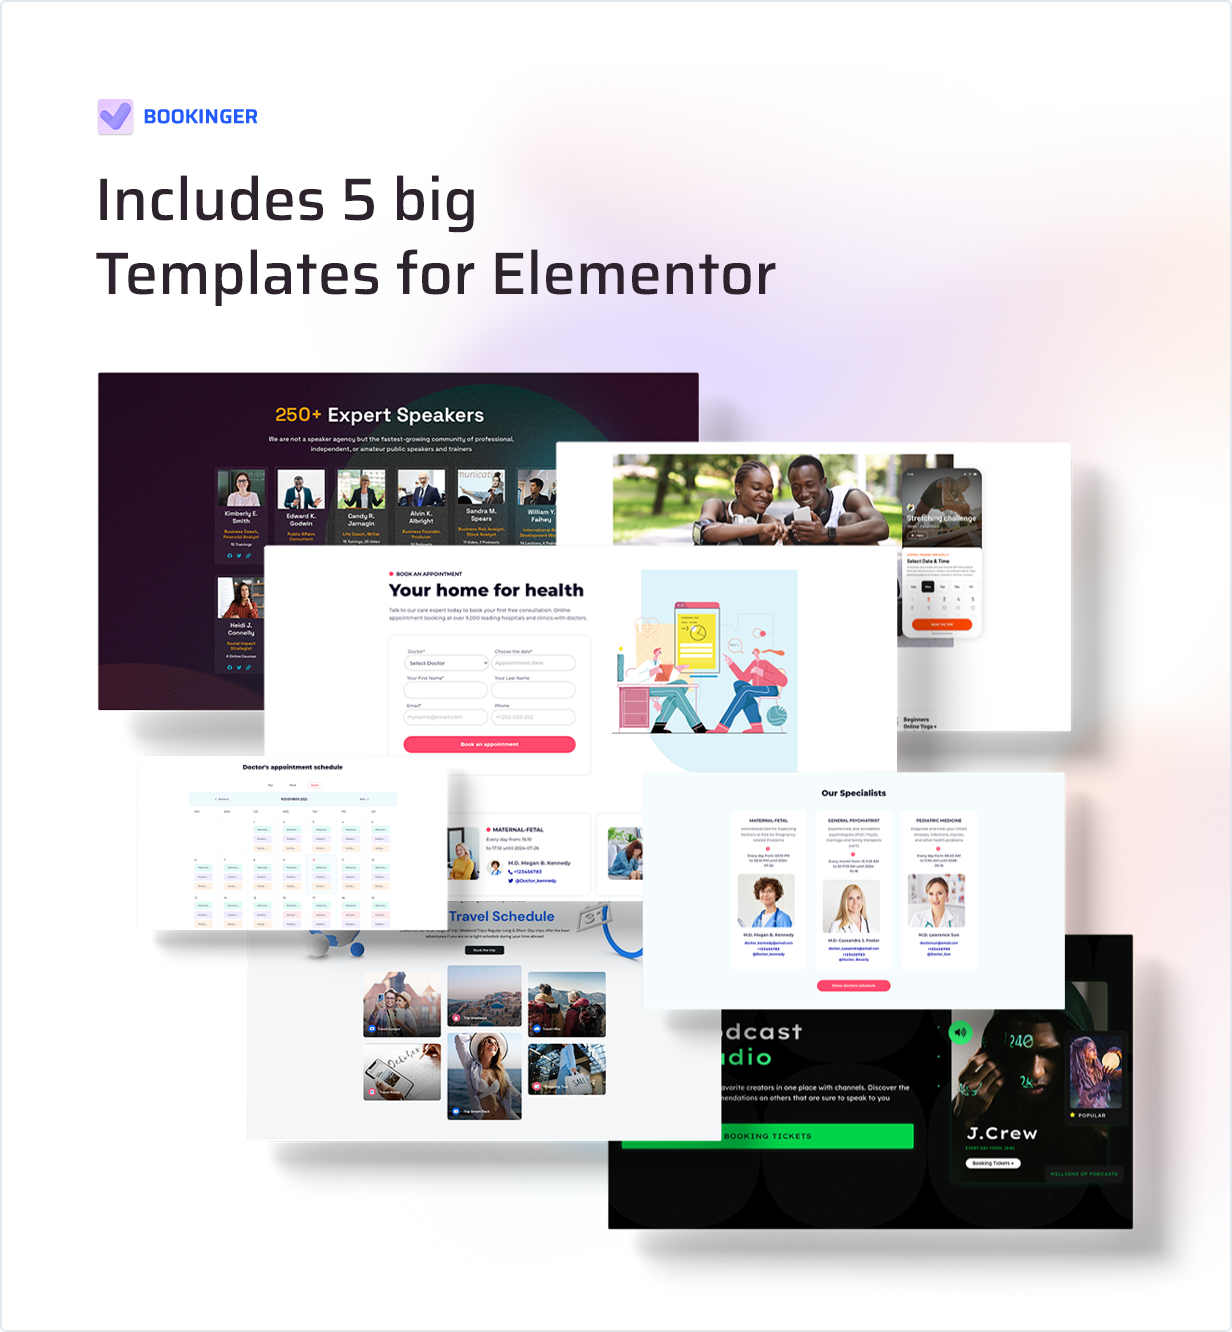 Includes 5 big Templates for Elementor